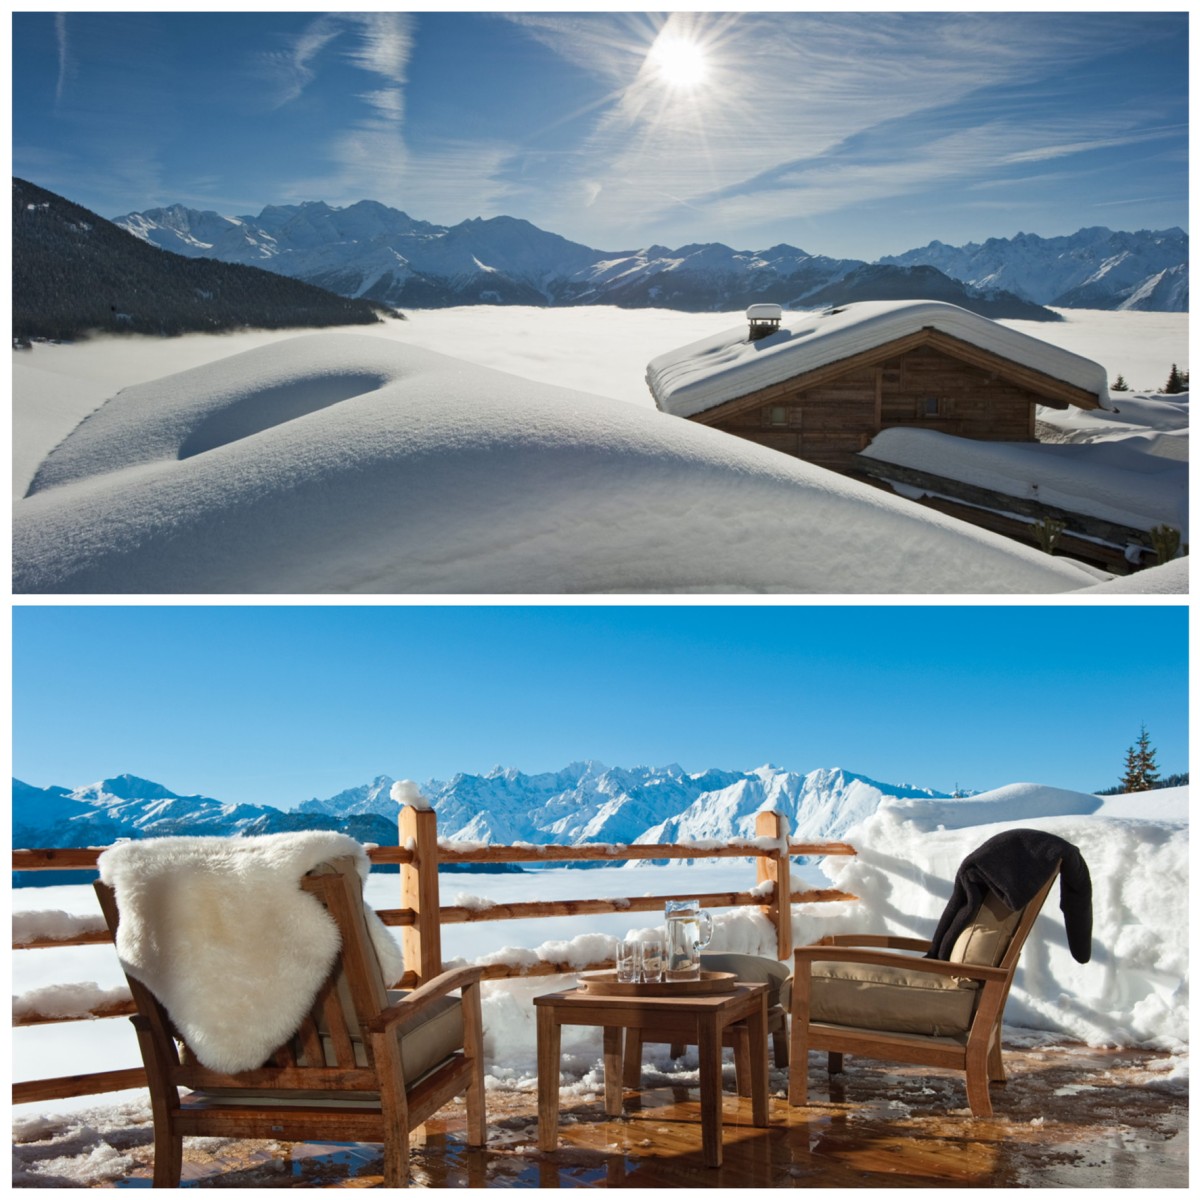 Chalet Norte, Verbier, claims a lofty position, gazing across the stunning mountains